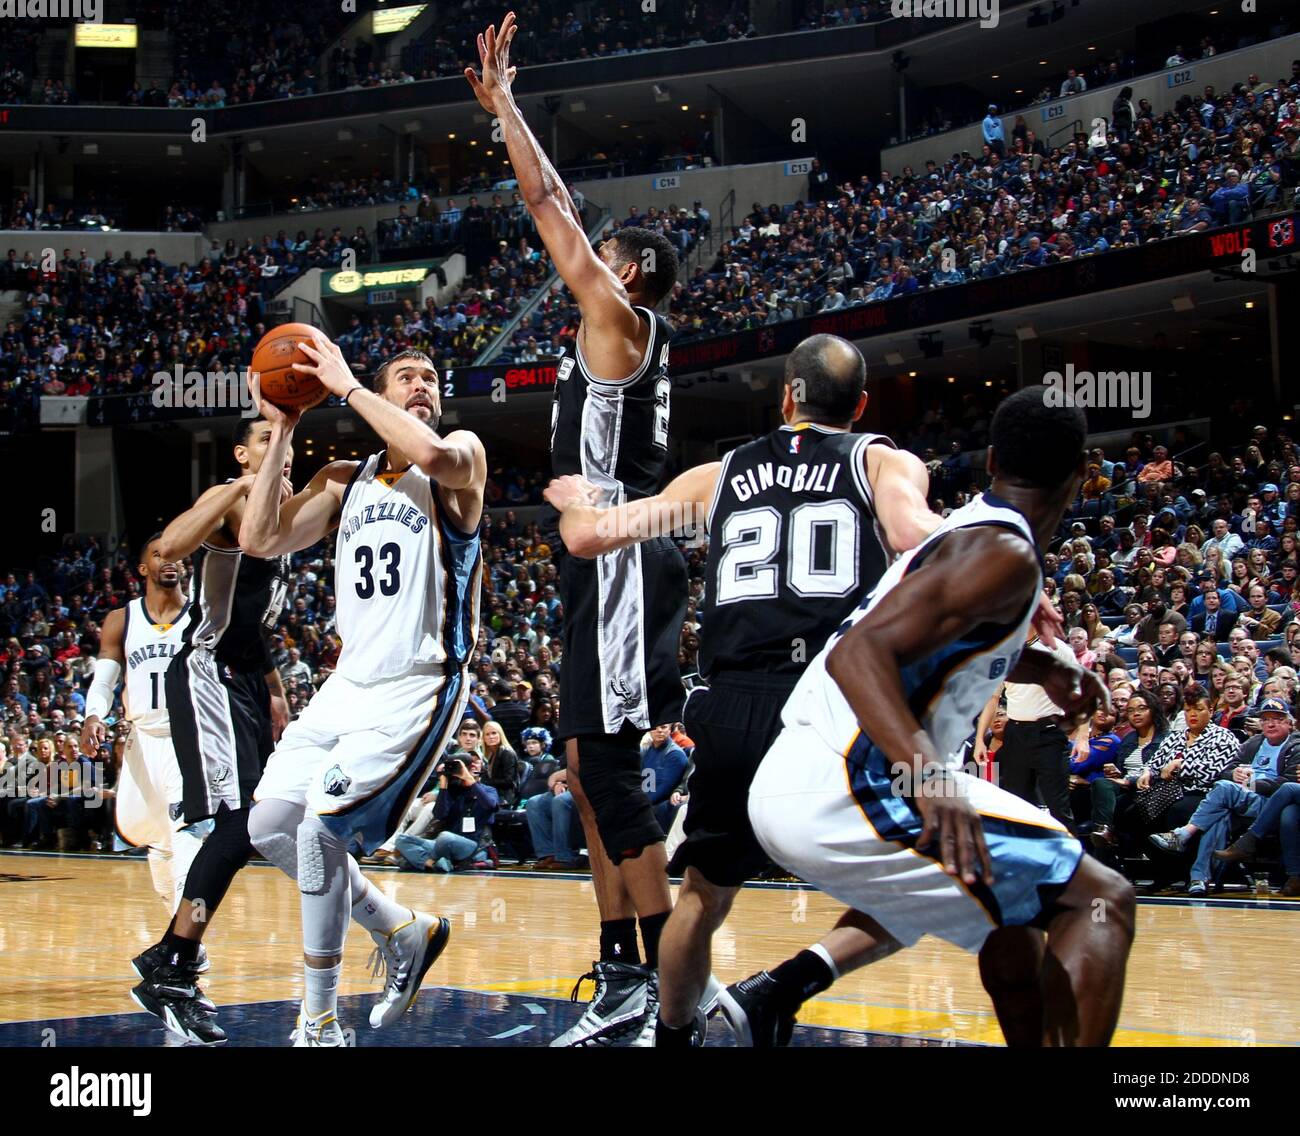 NO FILM, NO VIDEO, NO TV, NO DOCUMENTARY - Memphis Grizzlies' Marc Gasol shoots, defended by San Antonio Spurs' Danny Green, left, Tim Duncan and Manu Ginobili (20) on Tuesday, December 30, 2014 at FedExForum in Memphis, TN, USA. The Grizzlies won 95-87. Photo by Nikki Boertman/The Commercial Appeal/TNS/ABACAPRESS.COM Stock Photo